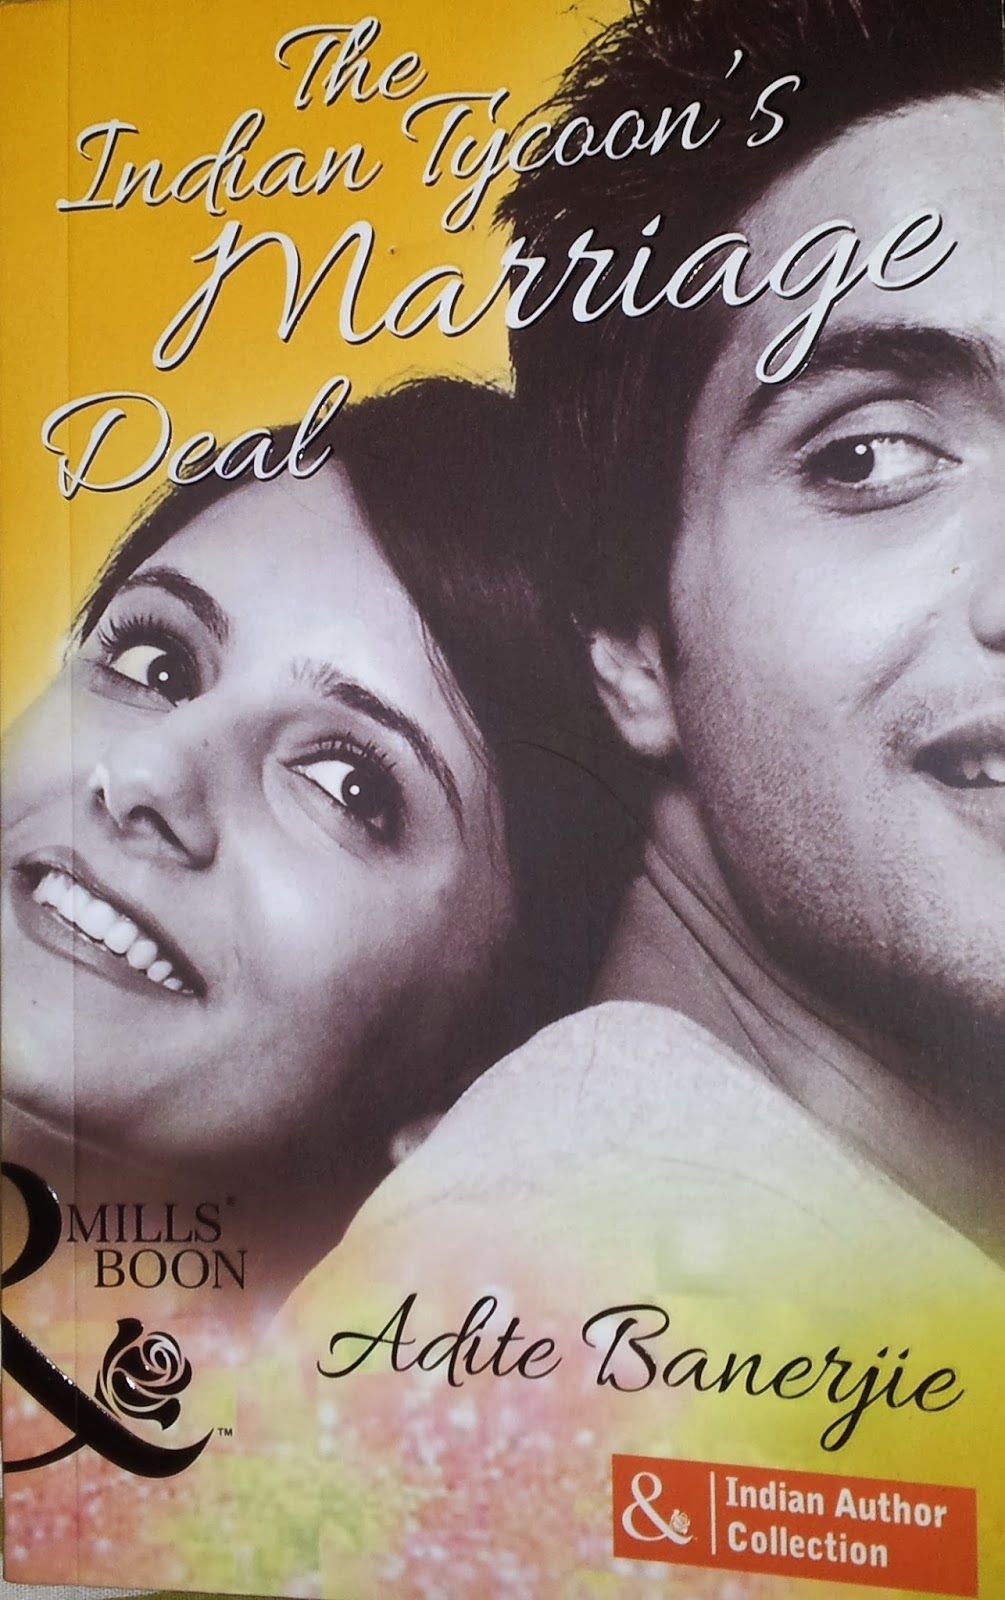 The Indian Tycoon's Marriage Deal by Adite Banerjie Book Review on Njkinny's Blog